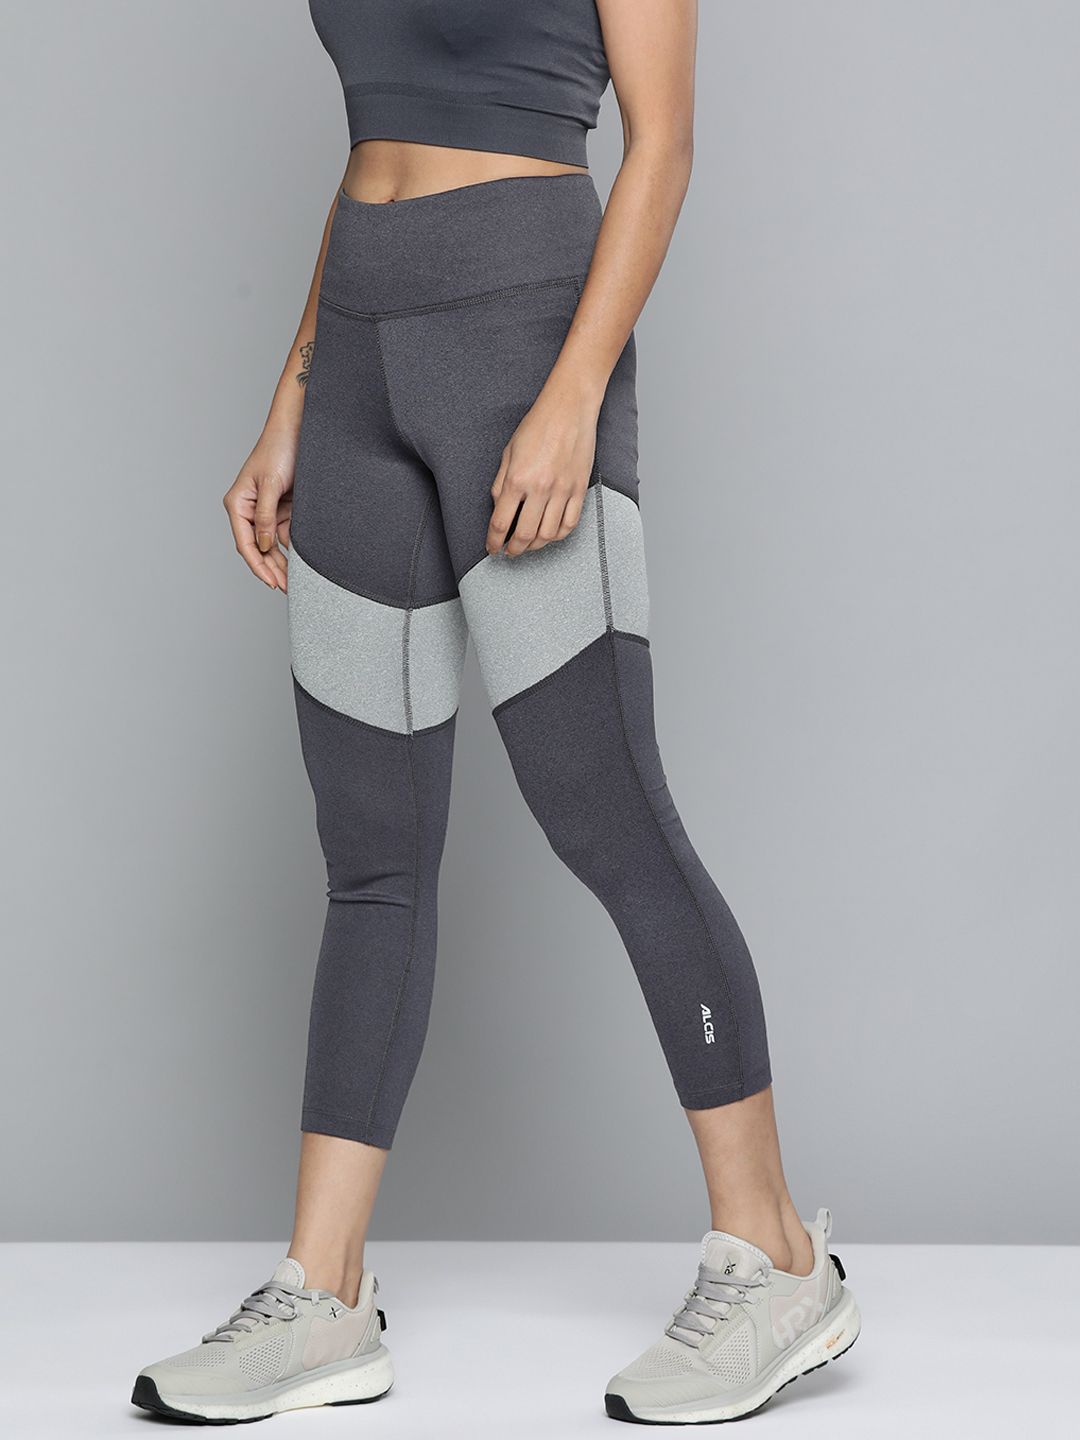 Alcis Women Charcoal Grey Colourblocked Cropped Sport Tights Price in India